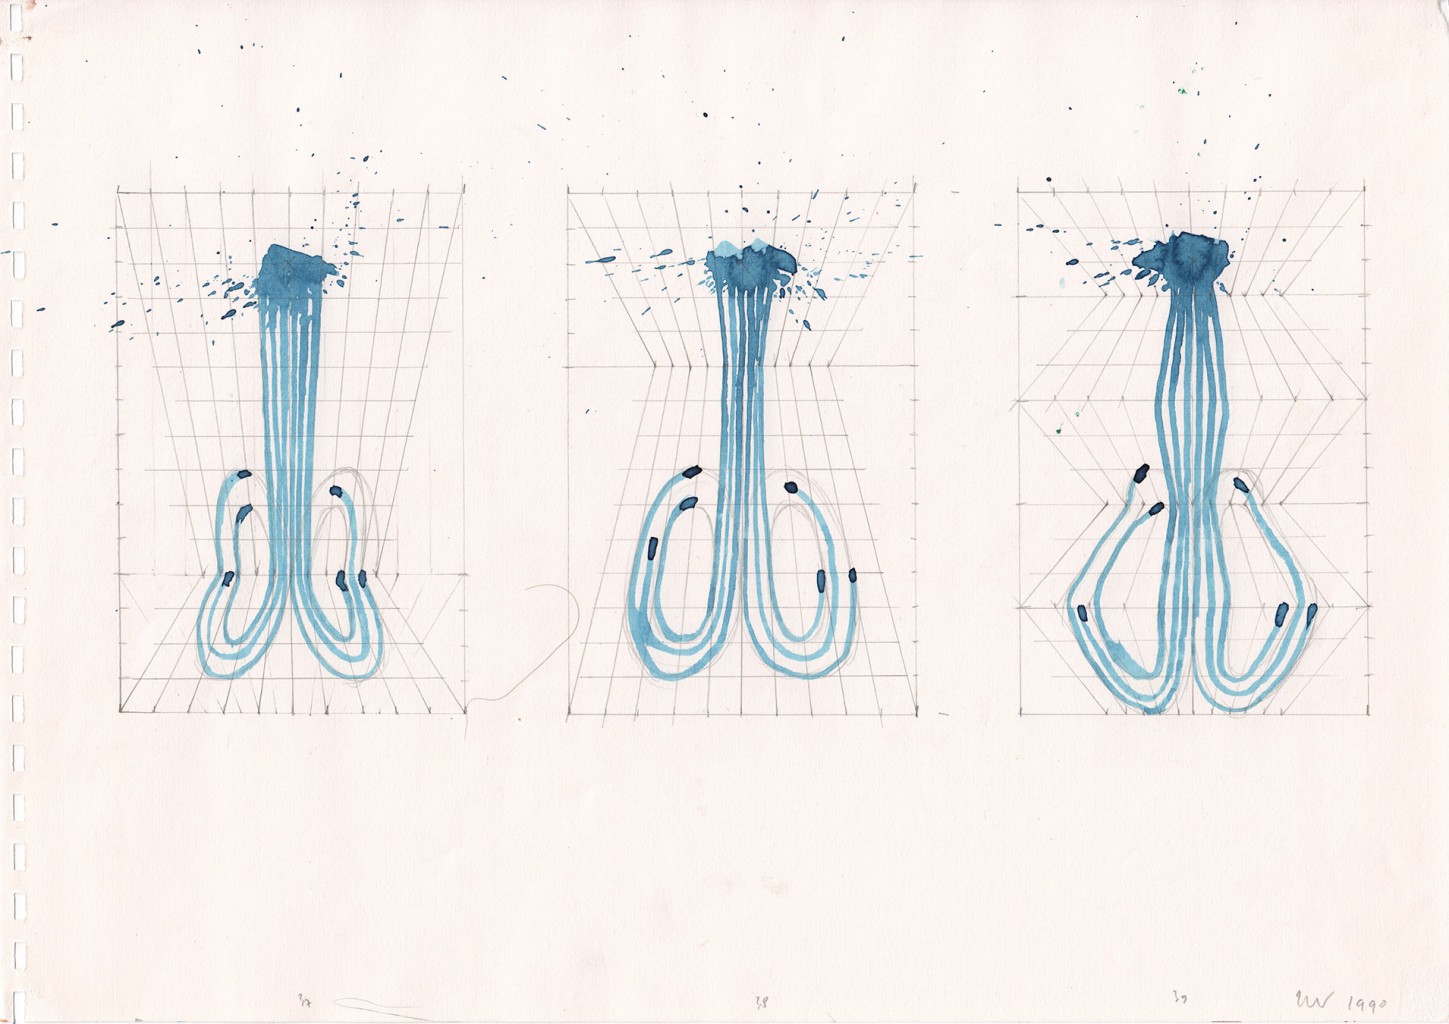 1991 29,6 x 41,9 cm 25 pages  75 drawings